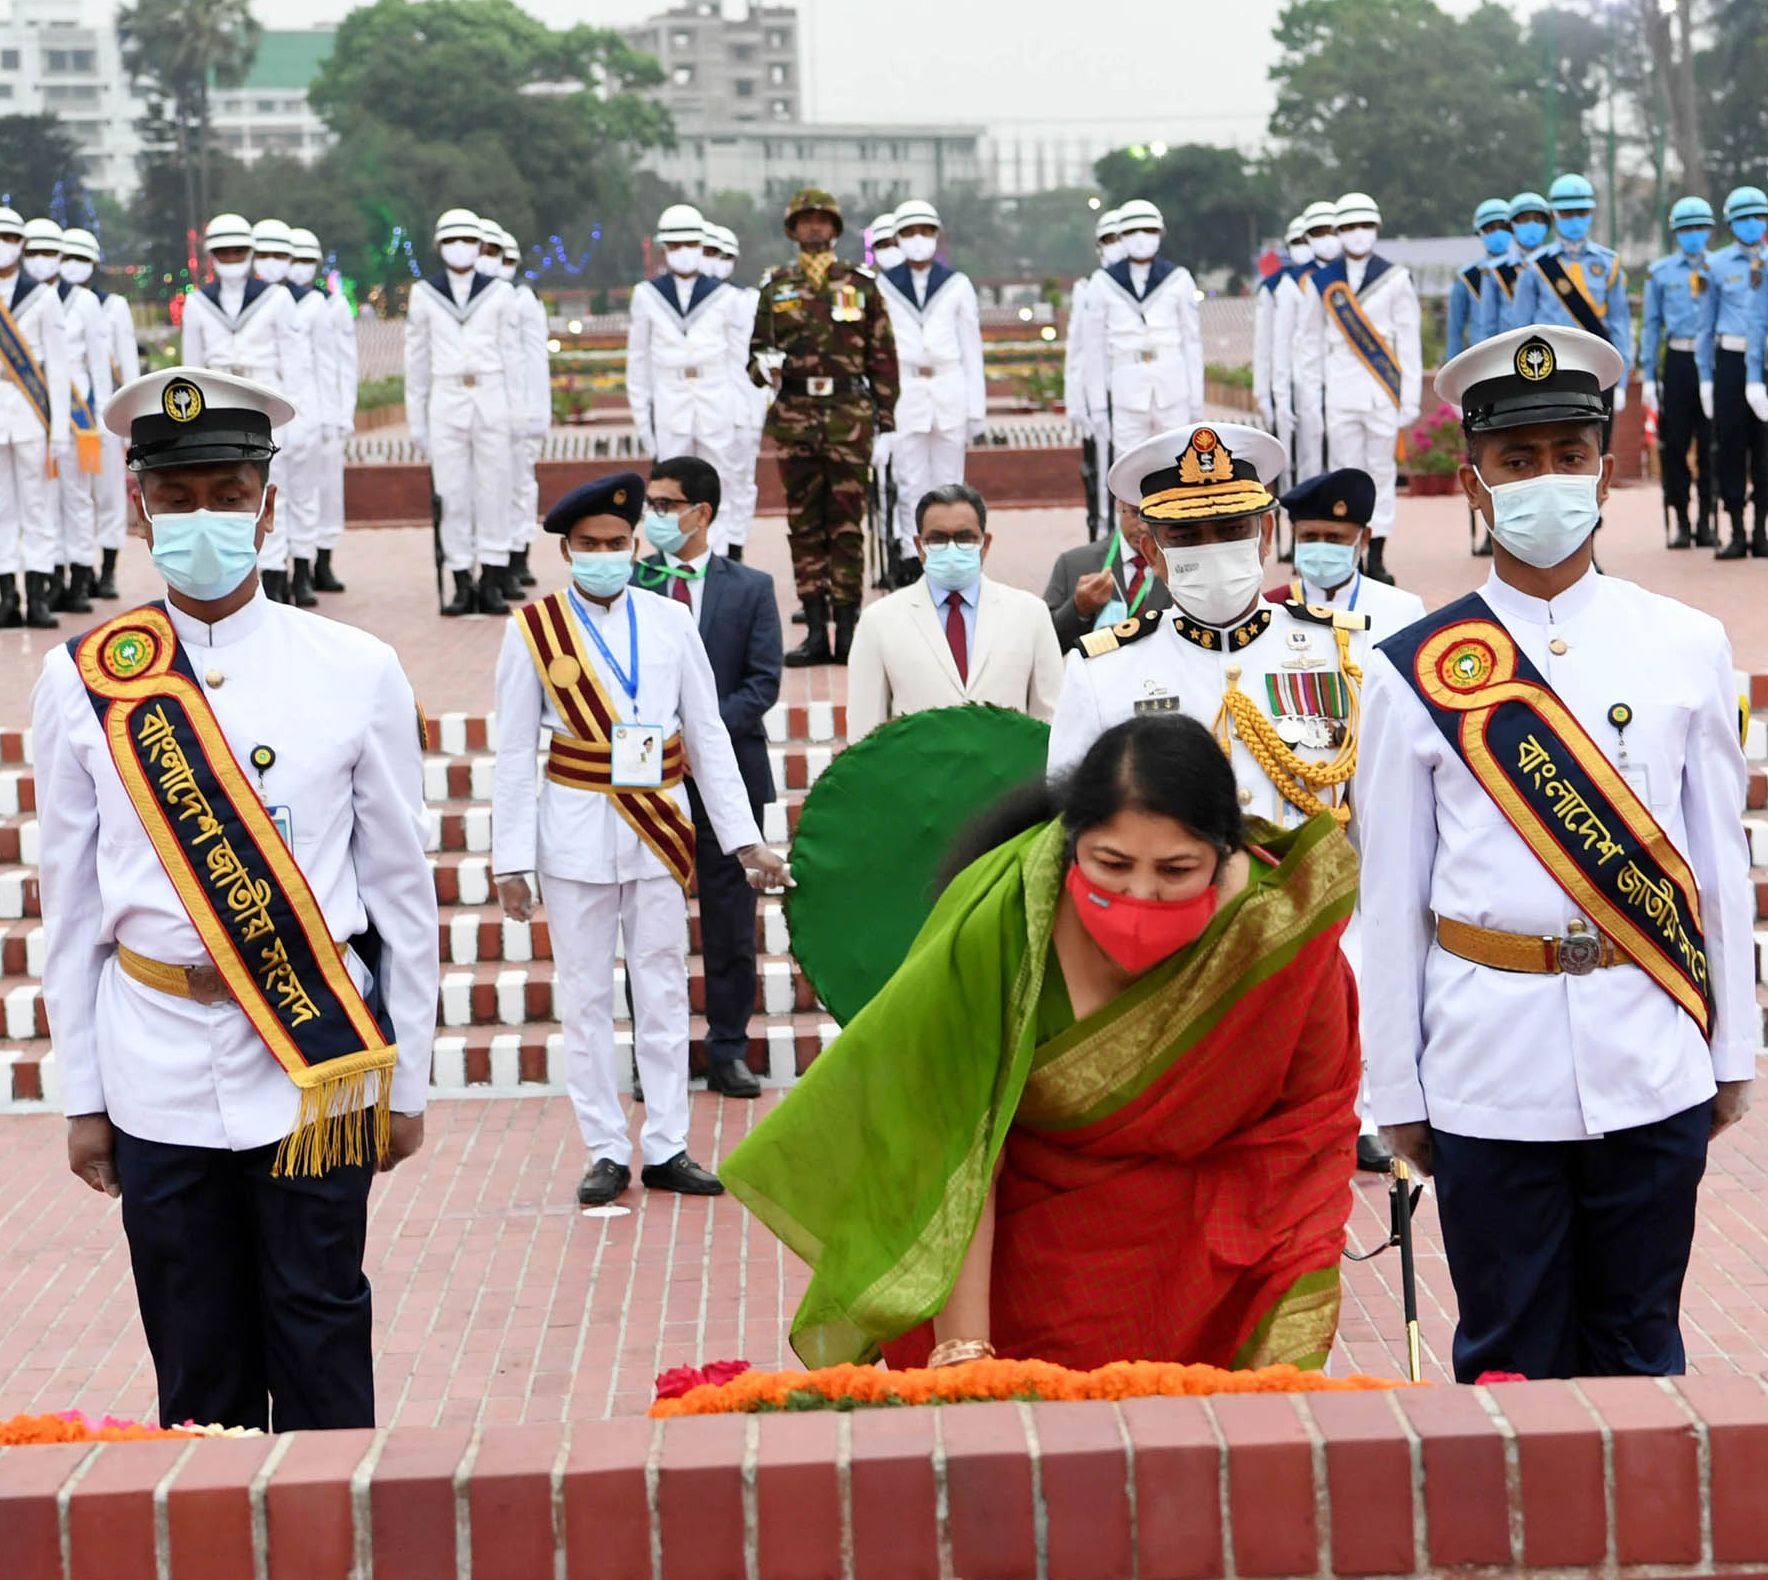 Jatiya Sangsad Speaker Dr Shirin Sharmin Chaudhury paid rich tributes to the Liberation War martyrs by placing wreaths at the National Memorial.